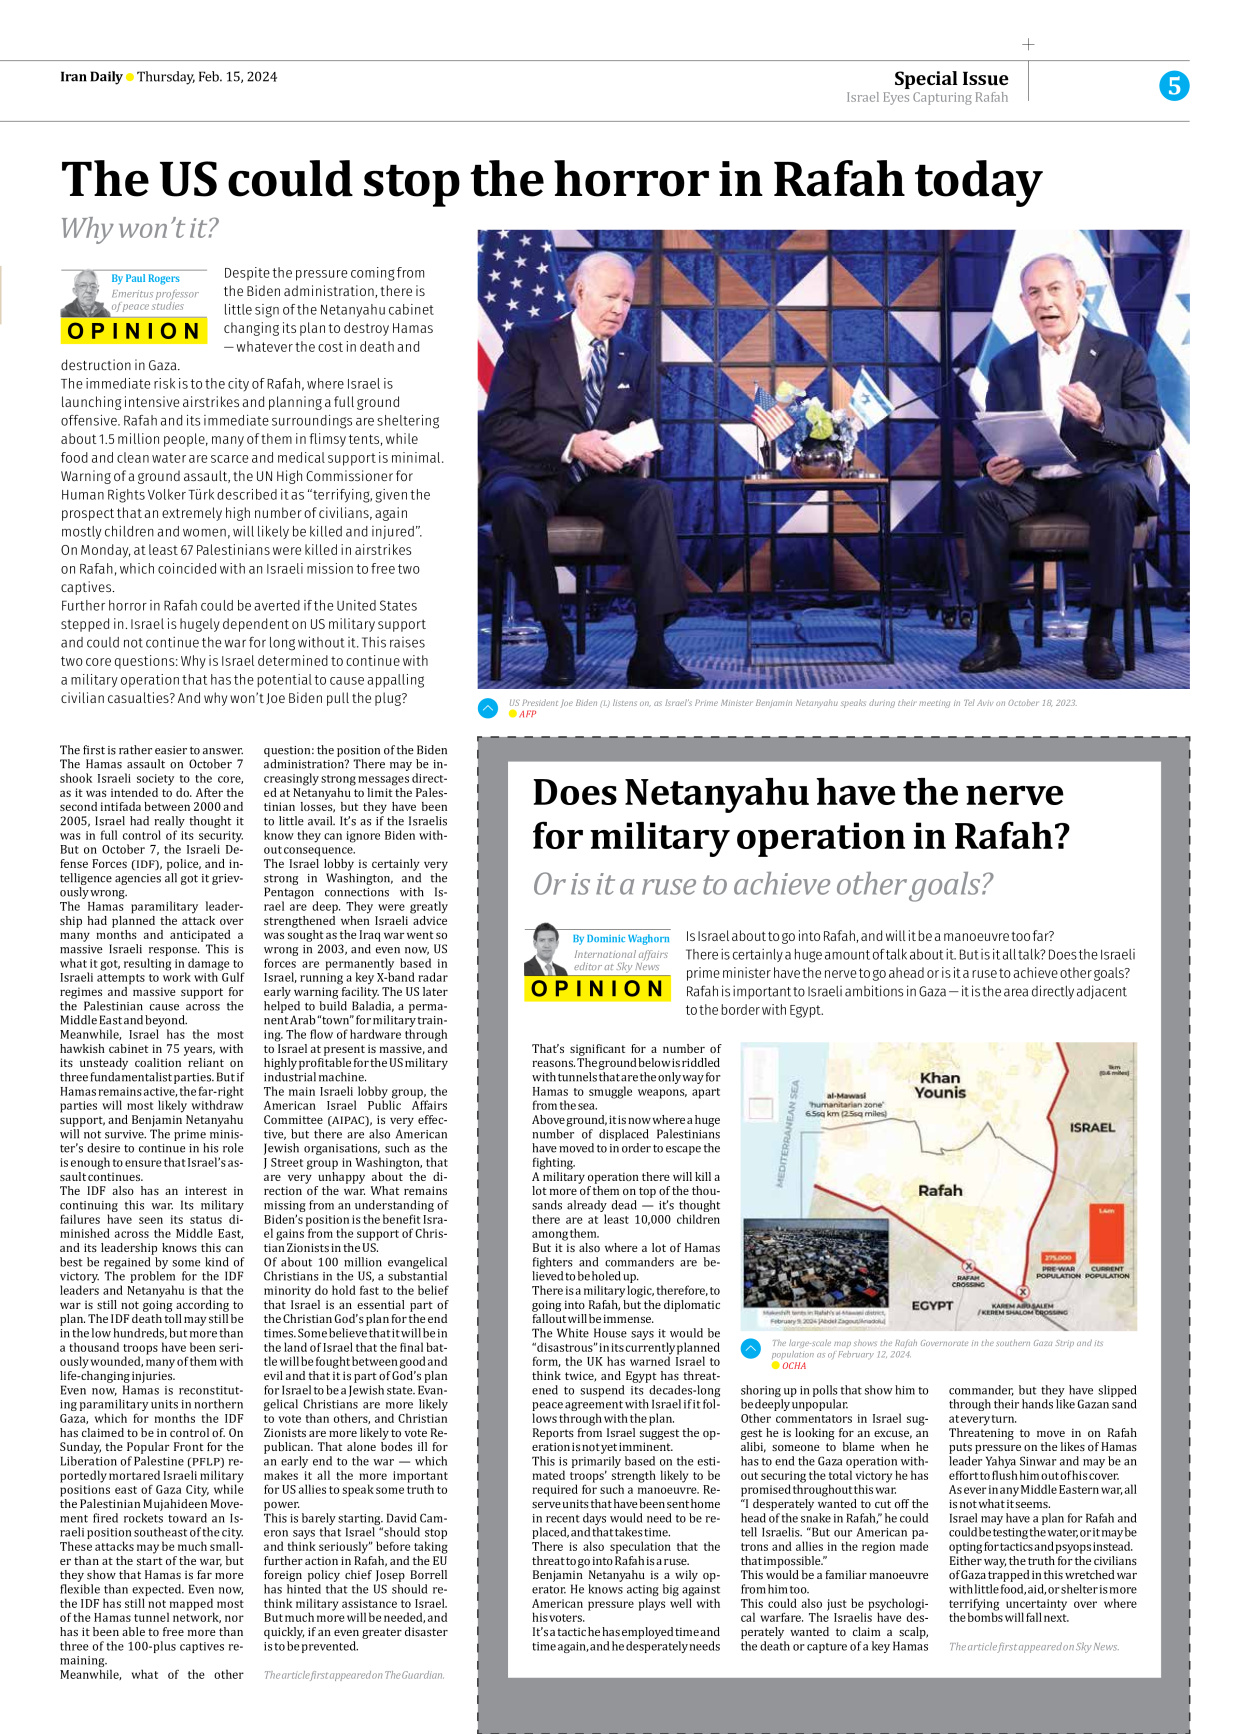 Iran Daily - Number Seven Thousand Five Hundred and Eight - 15 February 2024 - Page 5